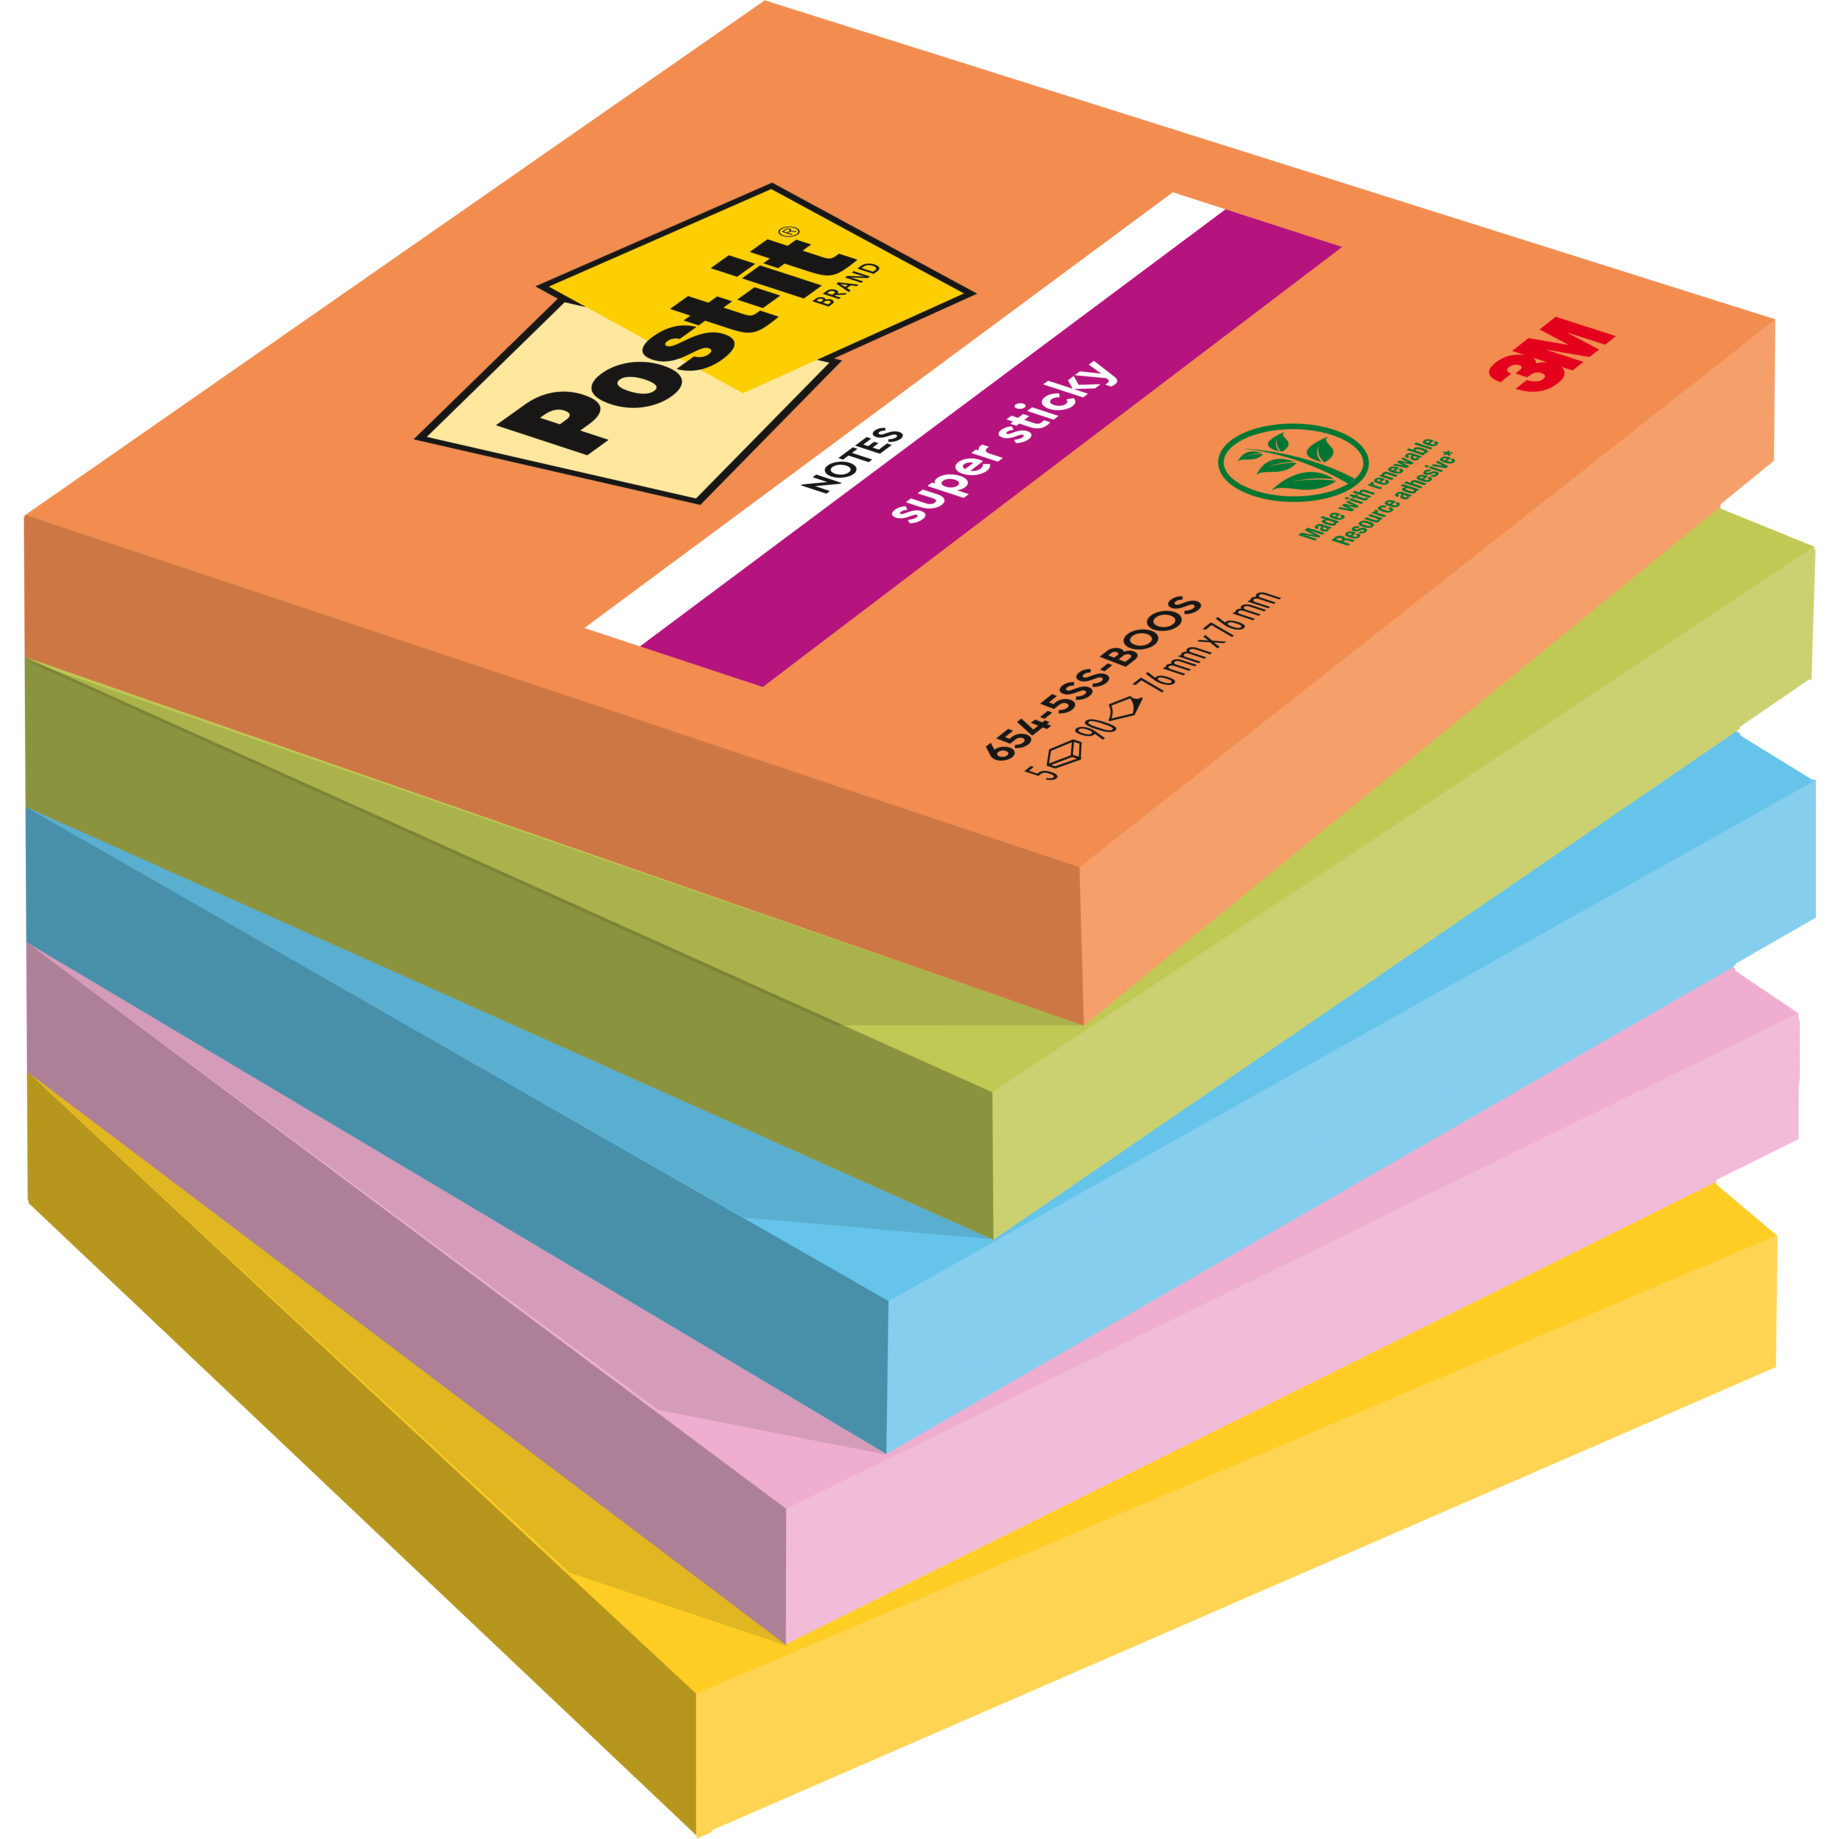 Post-it® Super Sticky Notes Boost Collection